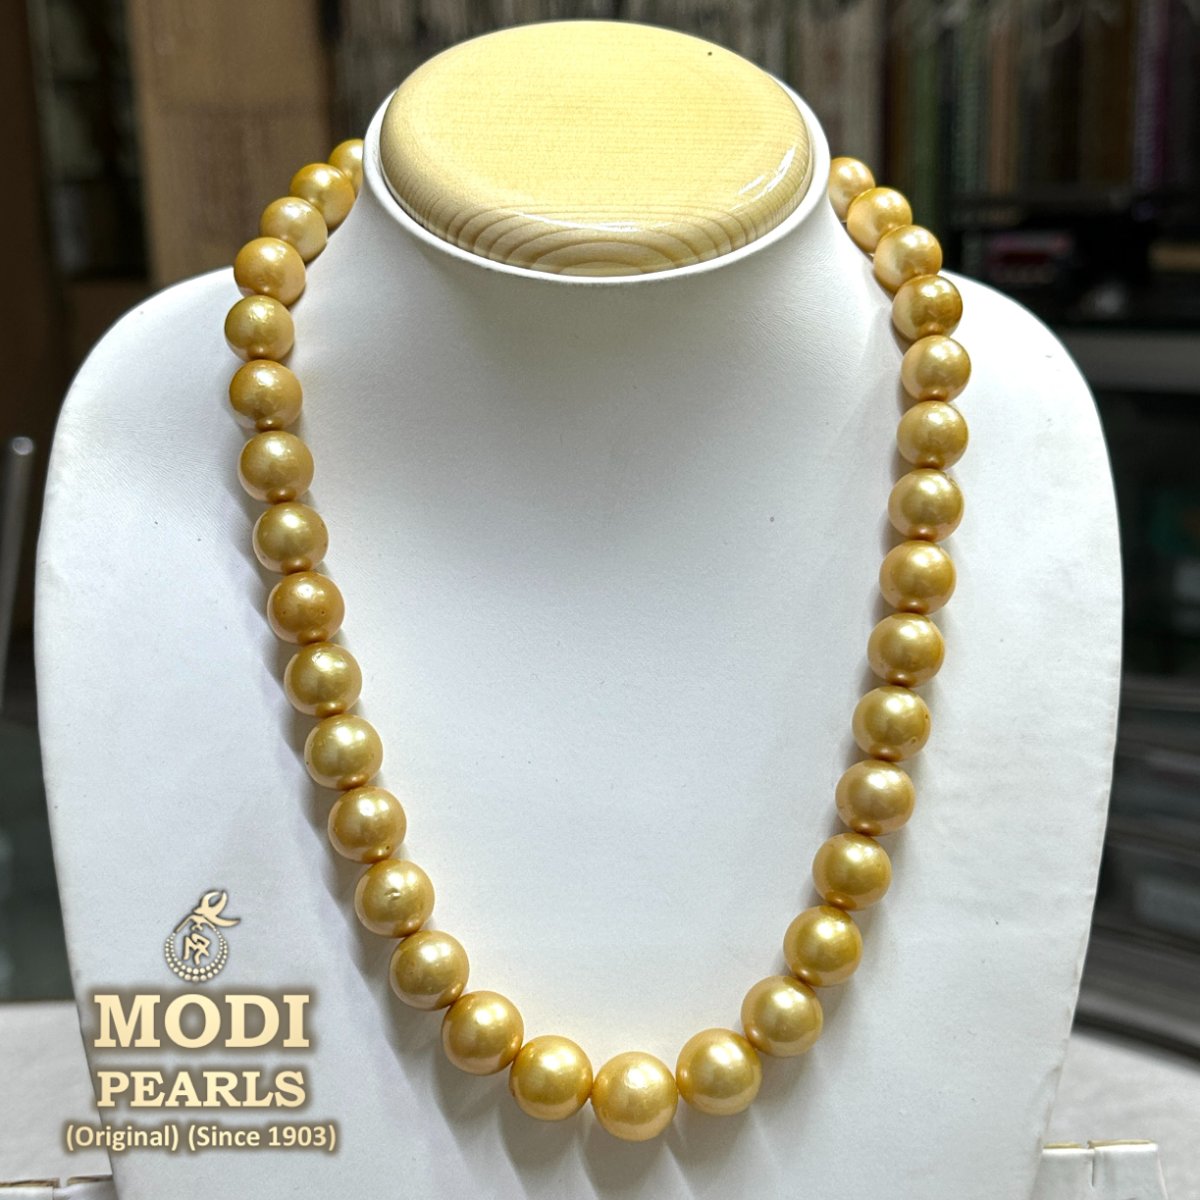 White Akoya Cultured Pearl Necklace 8-8.5mm A+ Quality at Premium Pearl